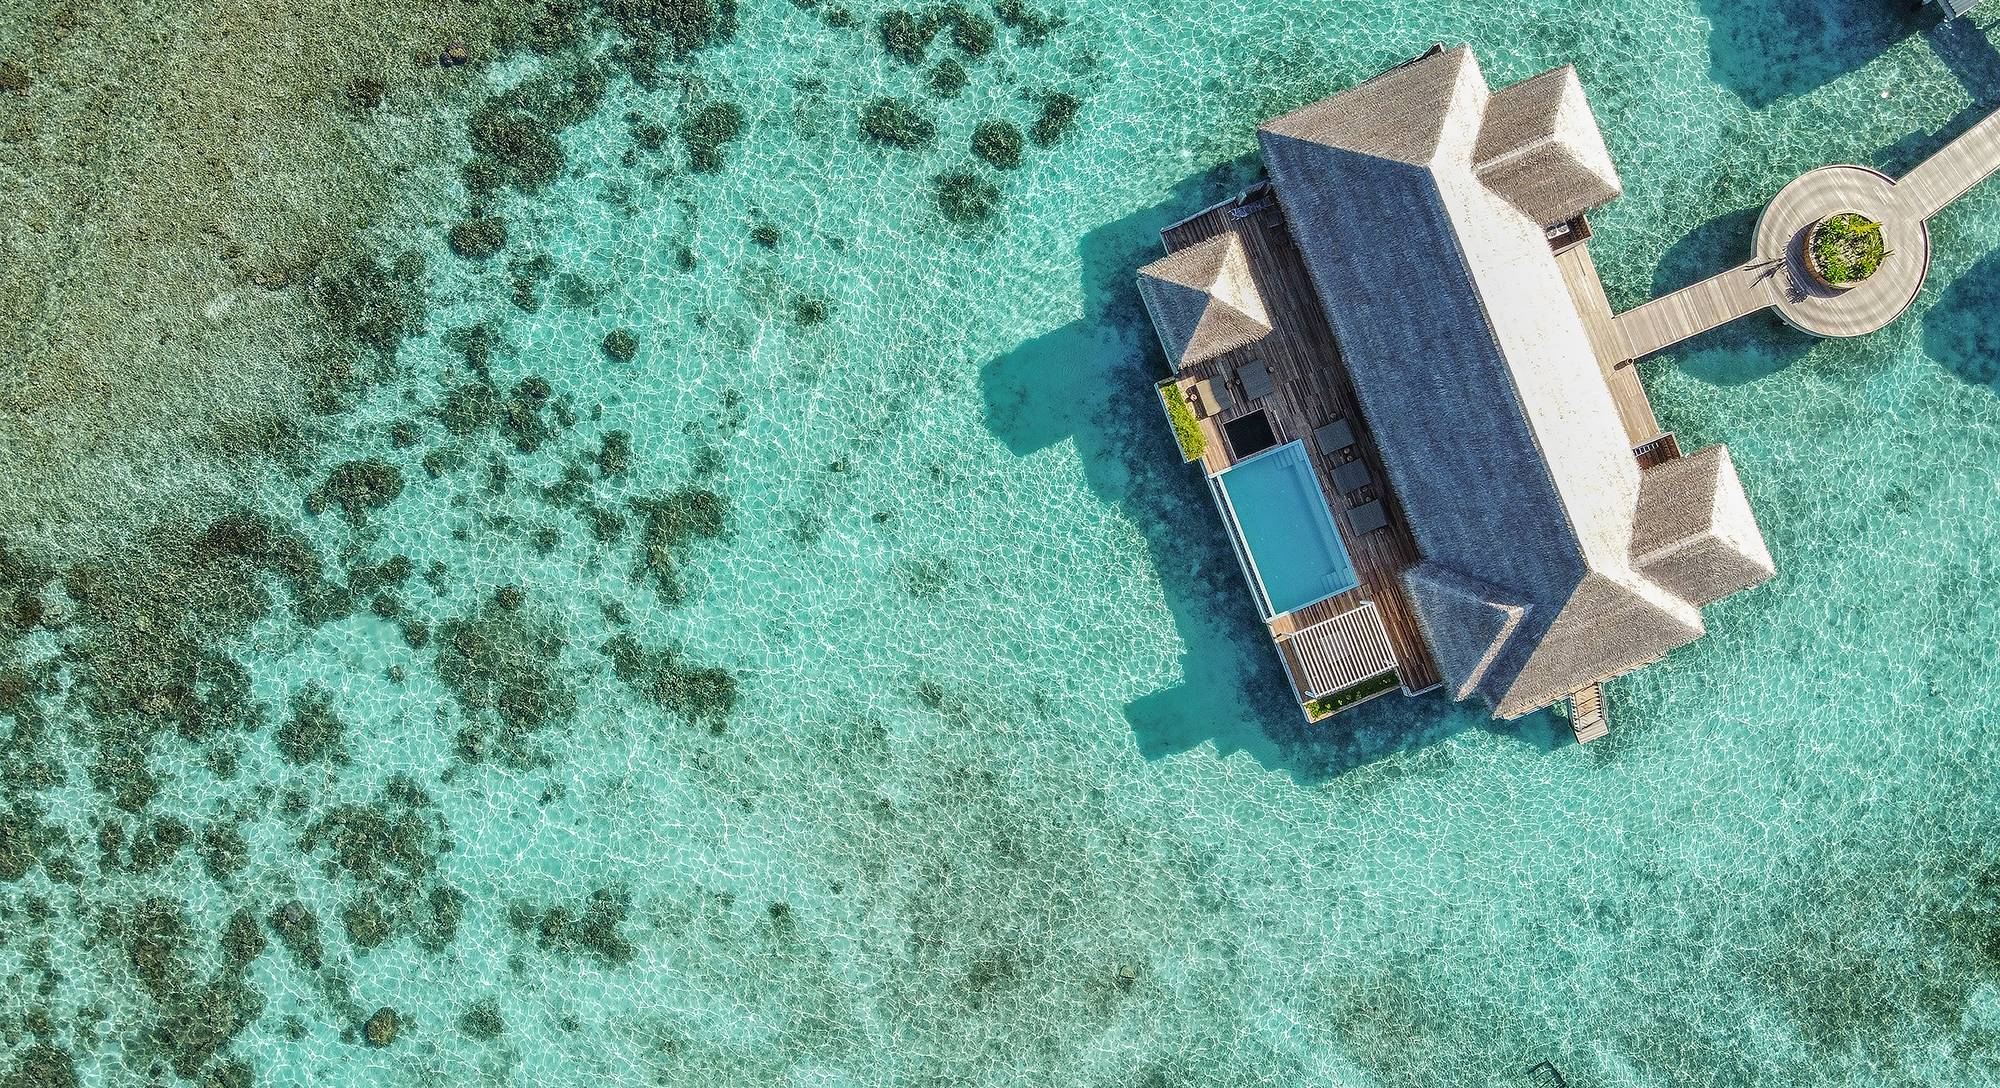 Baglioni Resort Maldives, Paradise with an Italian Touch